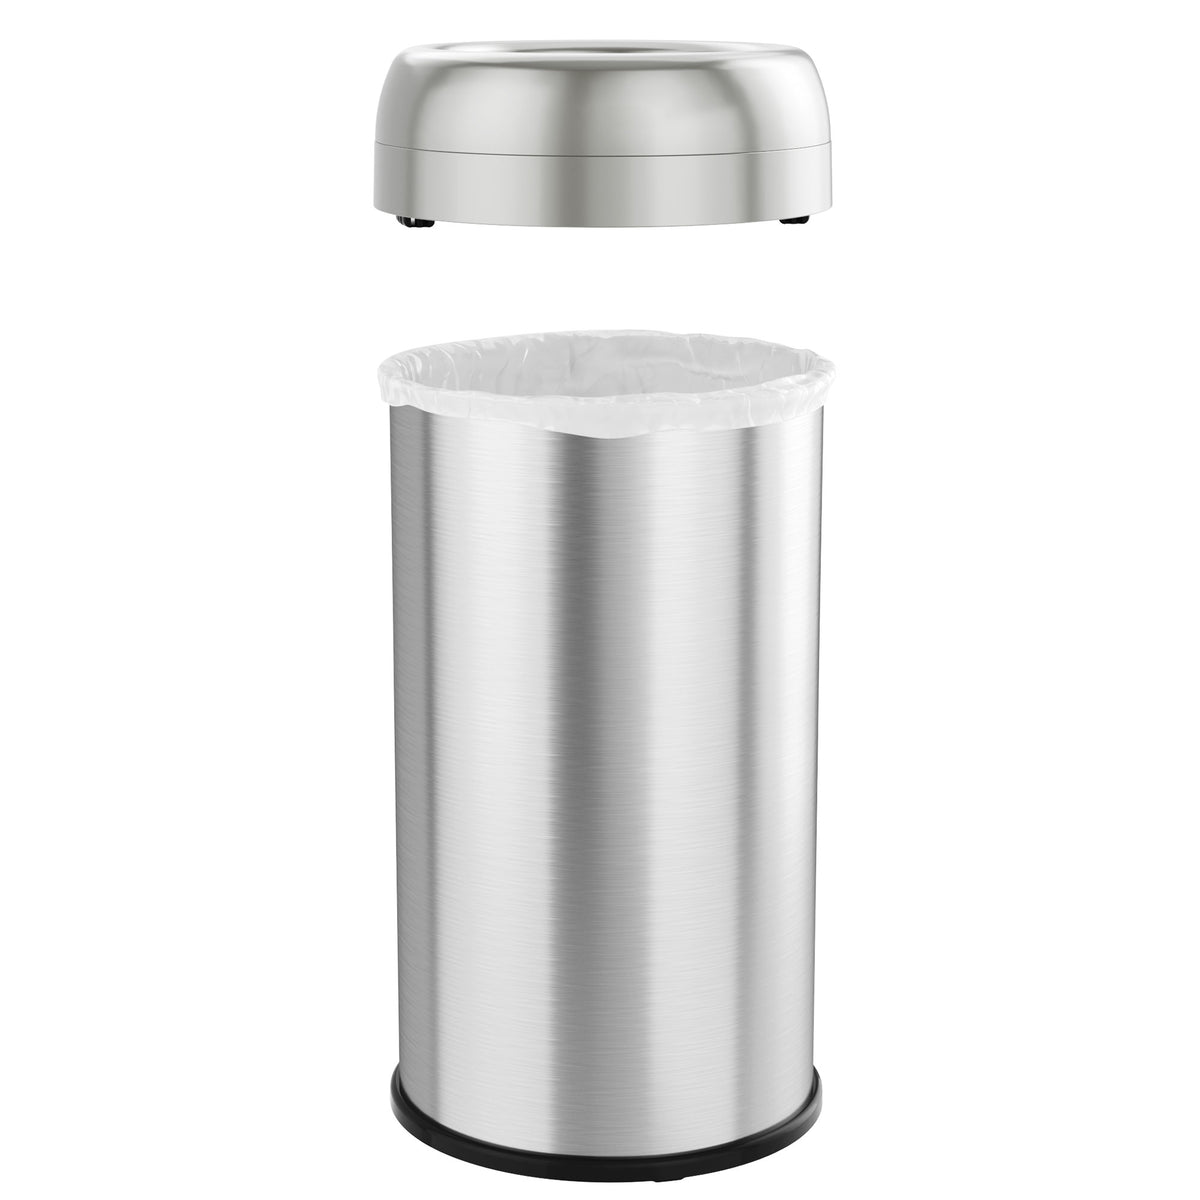 iTouchless Rolling Sensor Kitchen Trash Can & Recycle Bin with Wheels 16  Gallon Silver Stainless Steel